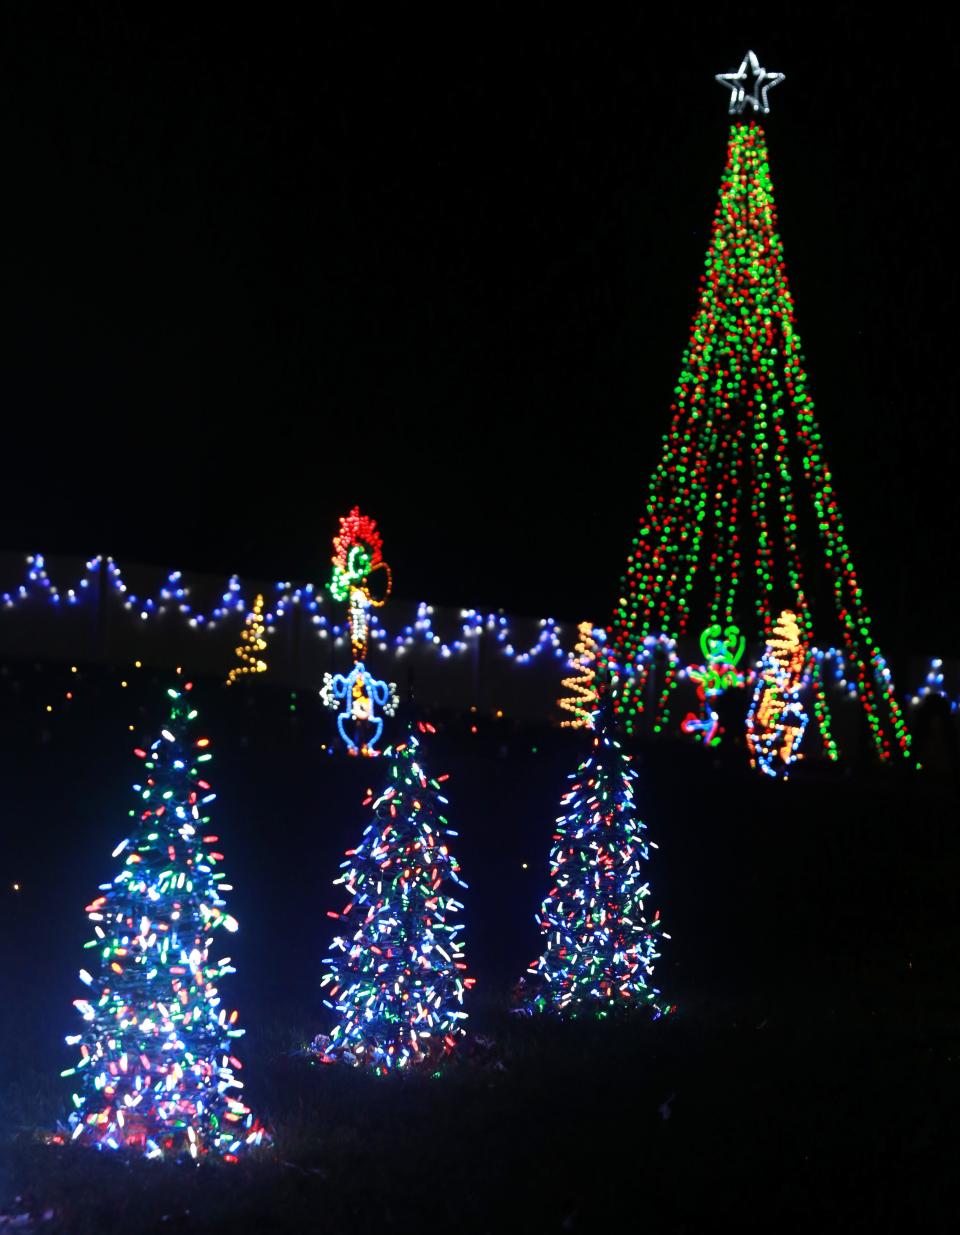 Lakeville resident Wayne Gateman is the man behind the Crazy Tech Christmas Animated Light Show, which has been running for 12 years and attracted many thousands of viewers in those years. This year, the show has nearly 80,000 lights and will likely entertain more than 10,000 visitors. Last year, Gateman says an estimated 20,000 people viewed the light show in what was a very busy year.